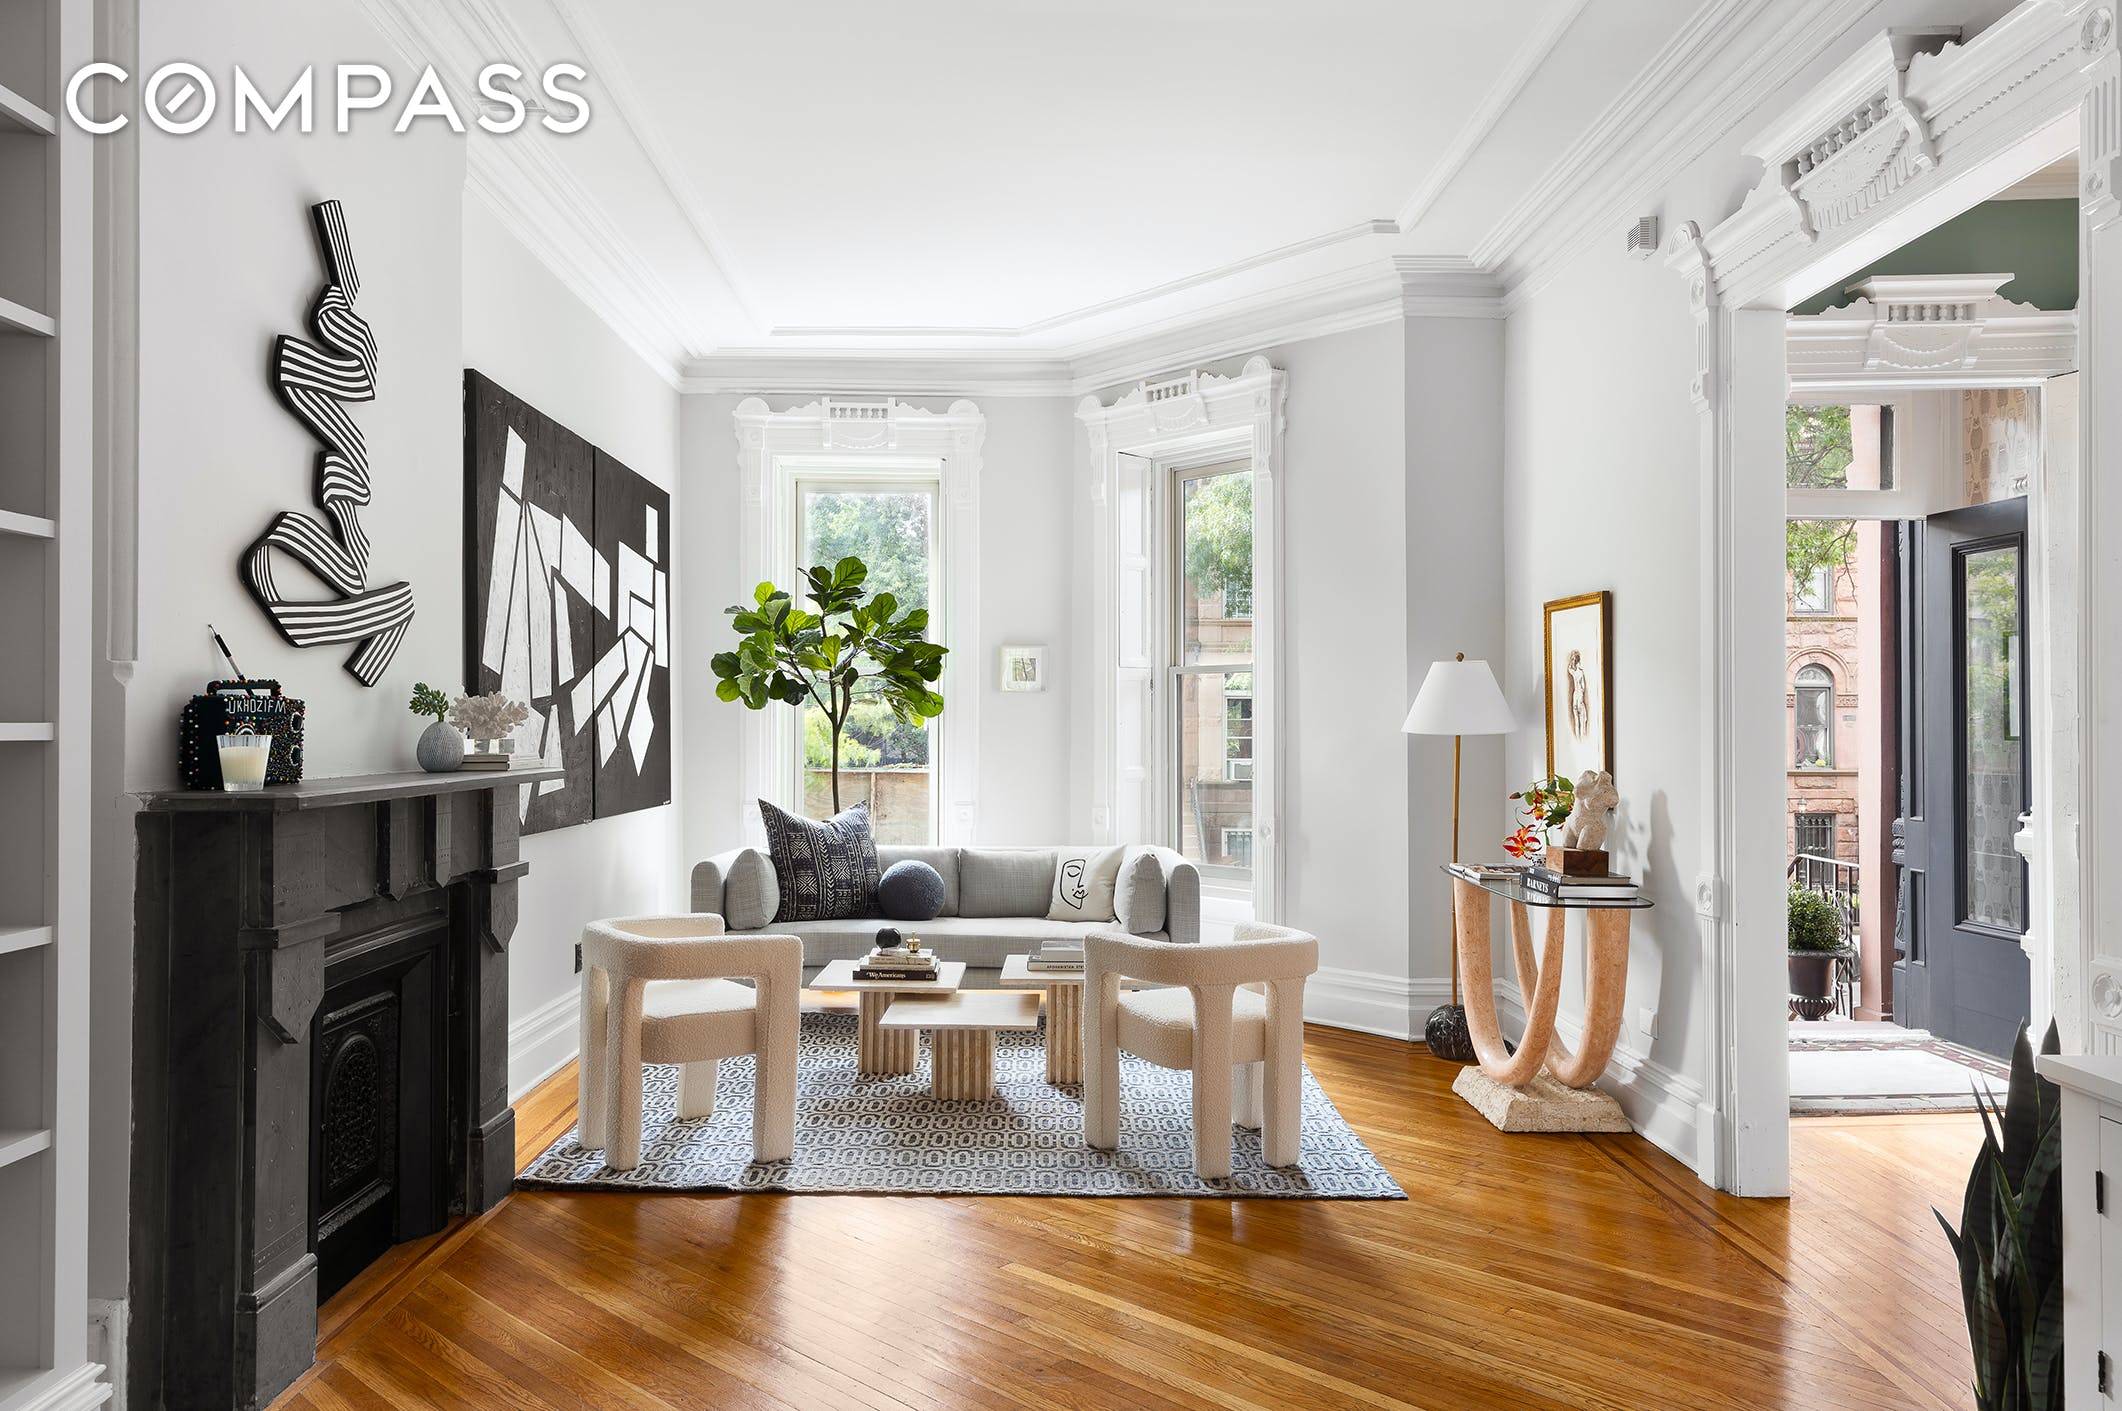 Welcome to classic brownstone living on a peaceful, tree lined block in the heart of Stuyvesant Heights.